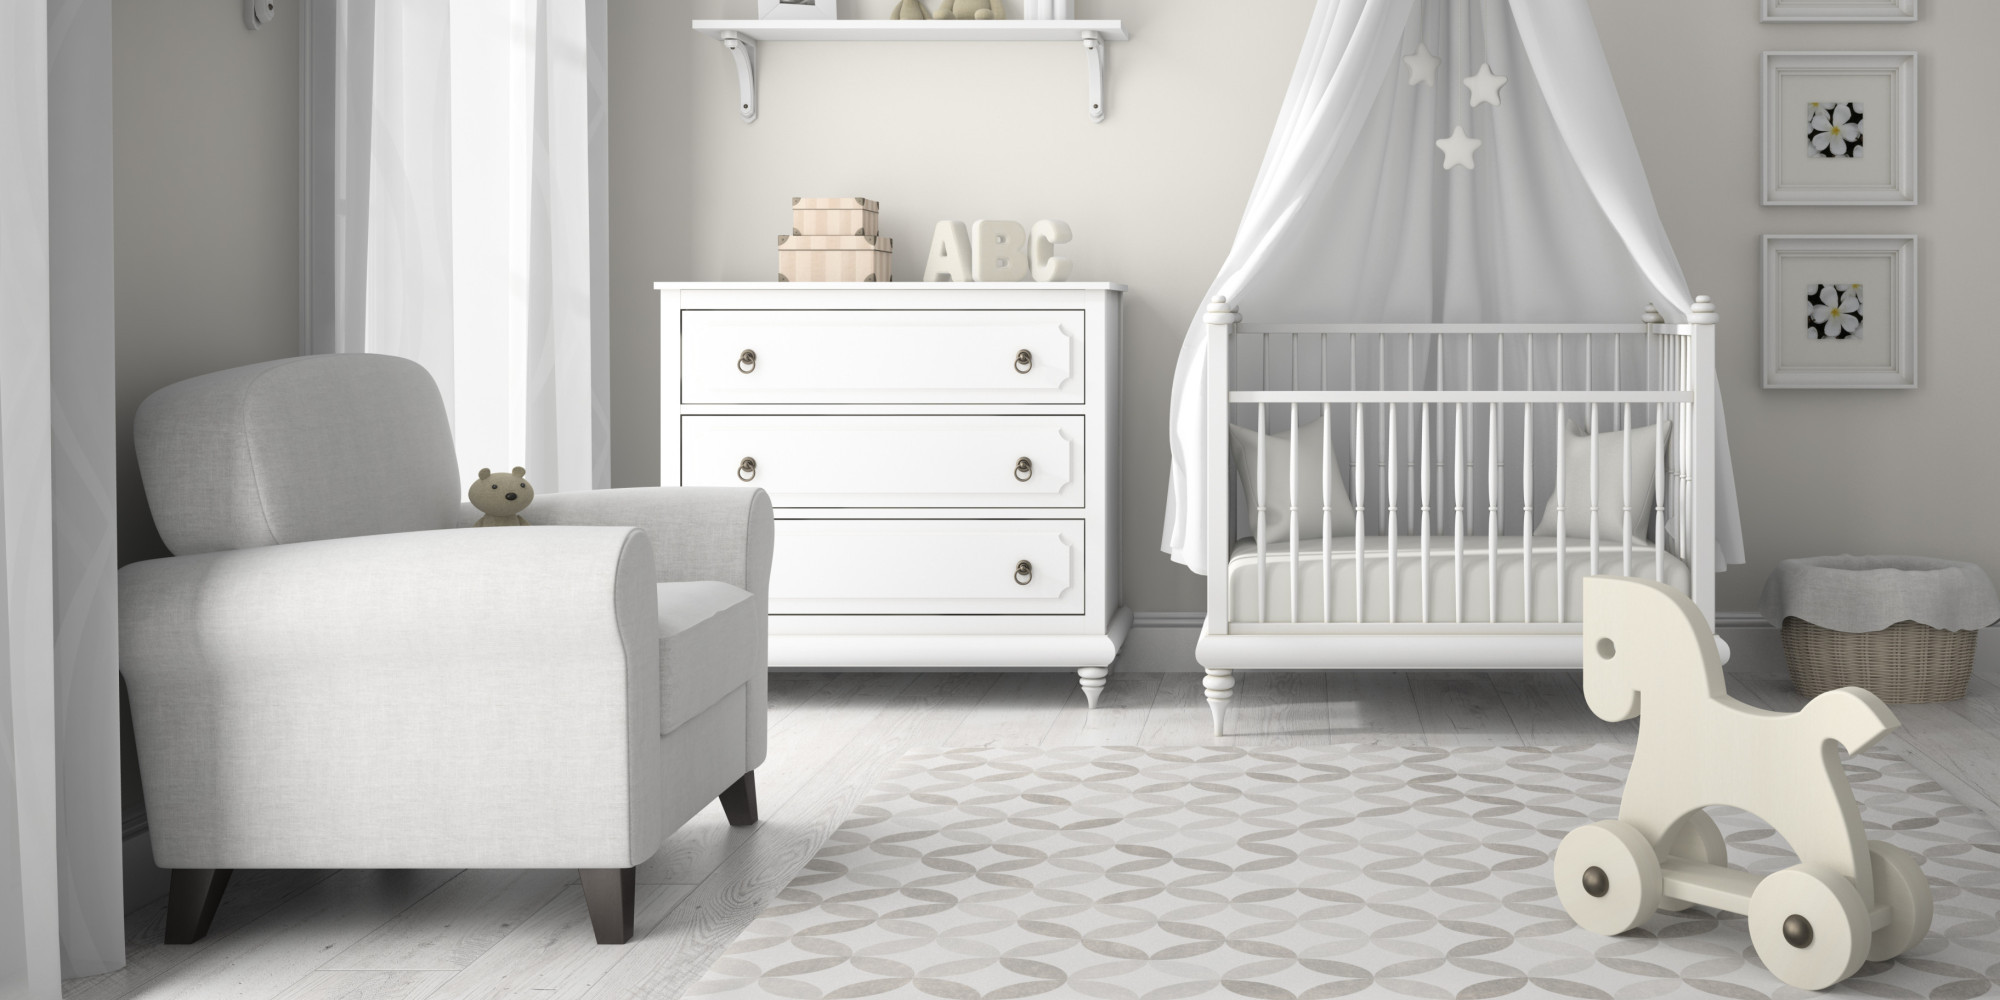 Decoration For Baby Room
 How To Decorate Your Baby s Nursery In A Day